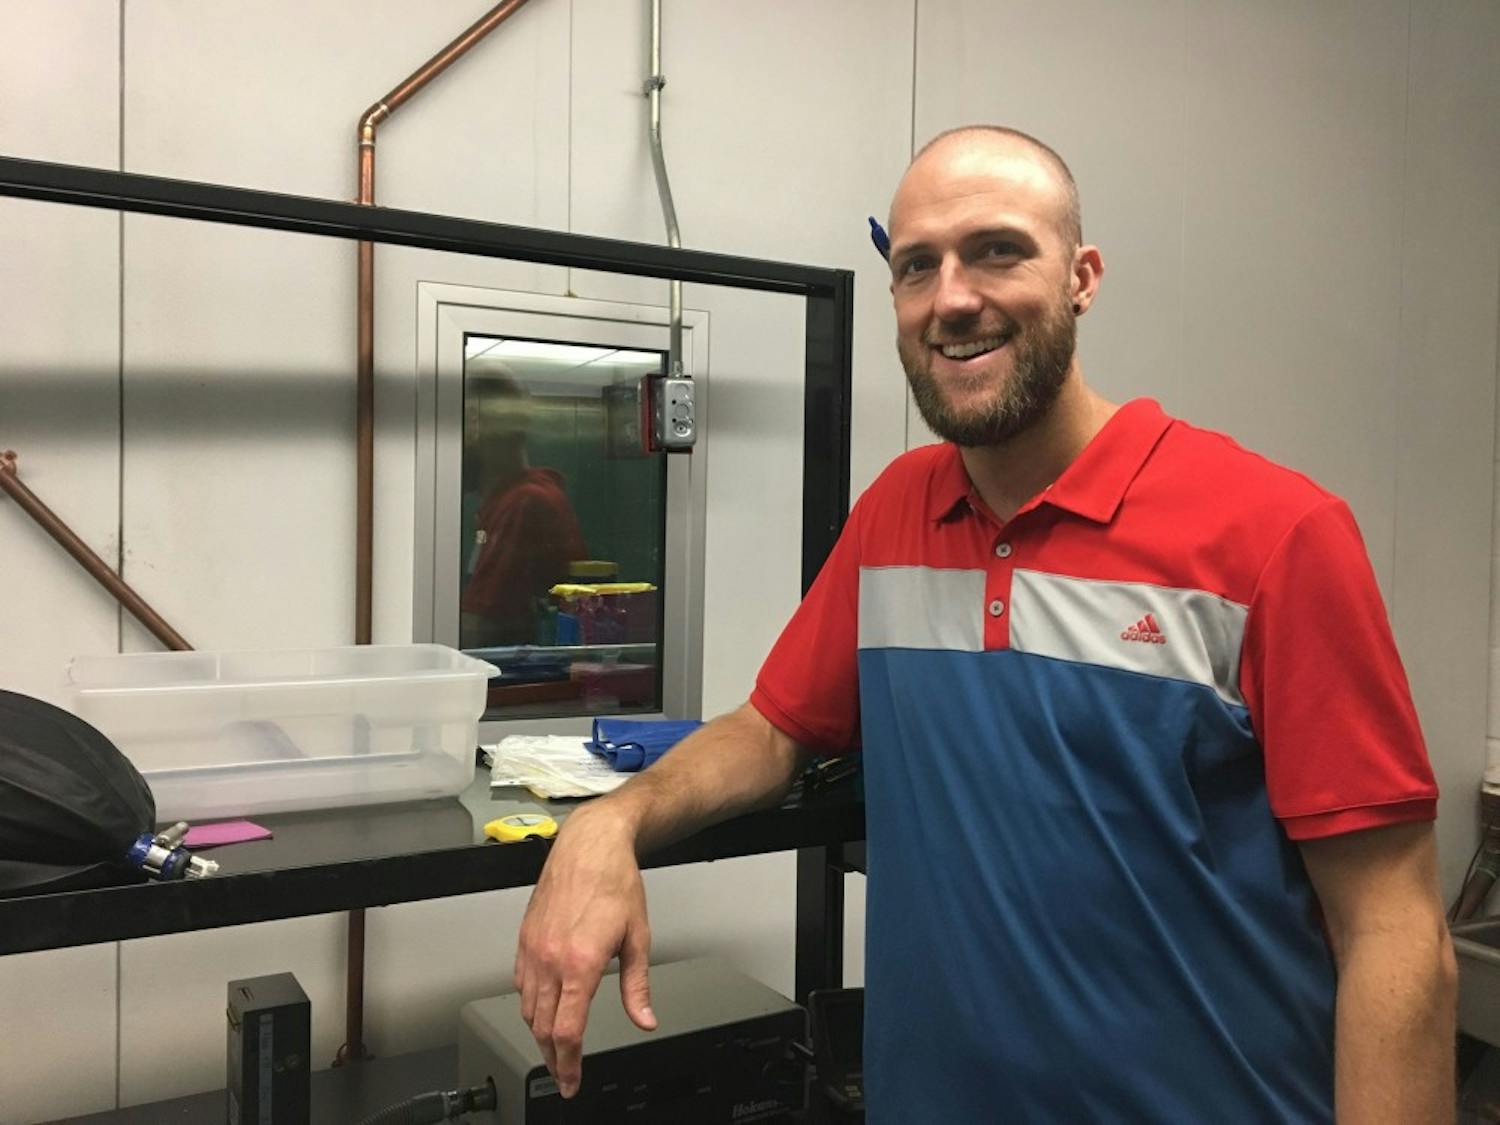 Dr. Zachary Schlader stands in the data collection area for a temperature-controlled room used in many of his research studies. Schlader, an assistant professor in the department of exercise and nutrition sciences, conducts research on exercise physiology, behavior and thermoregulation.